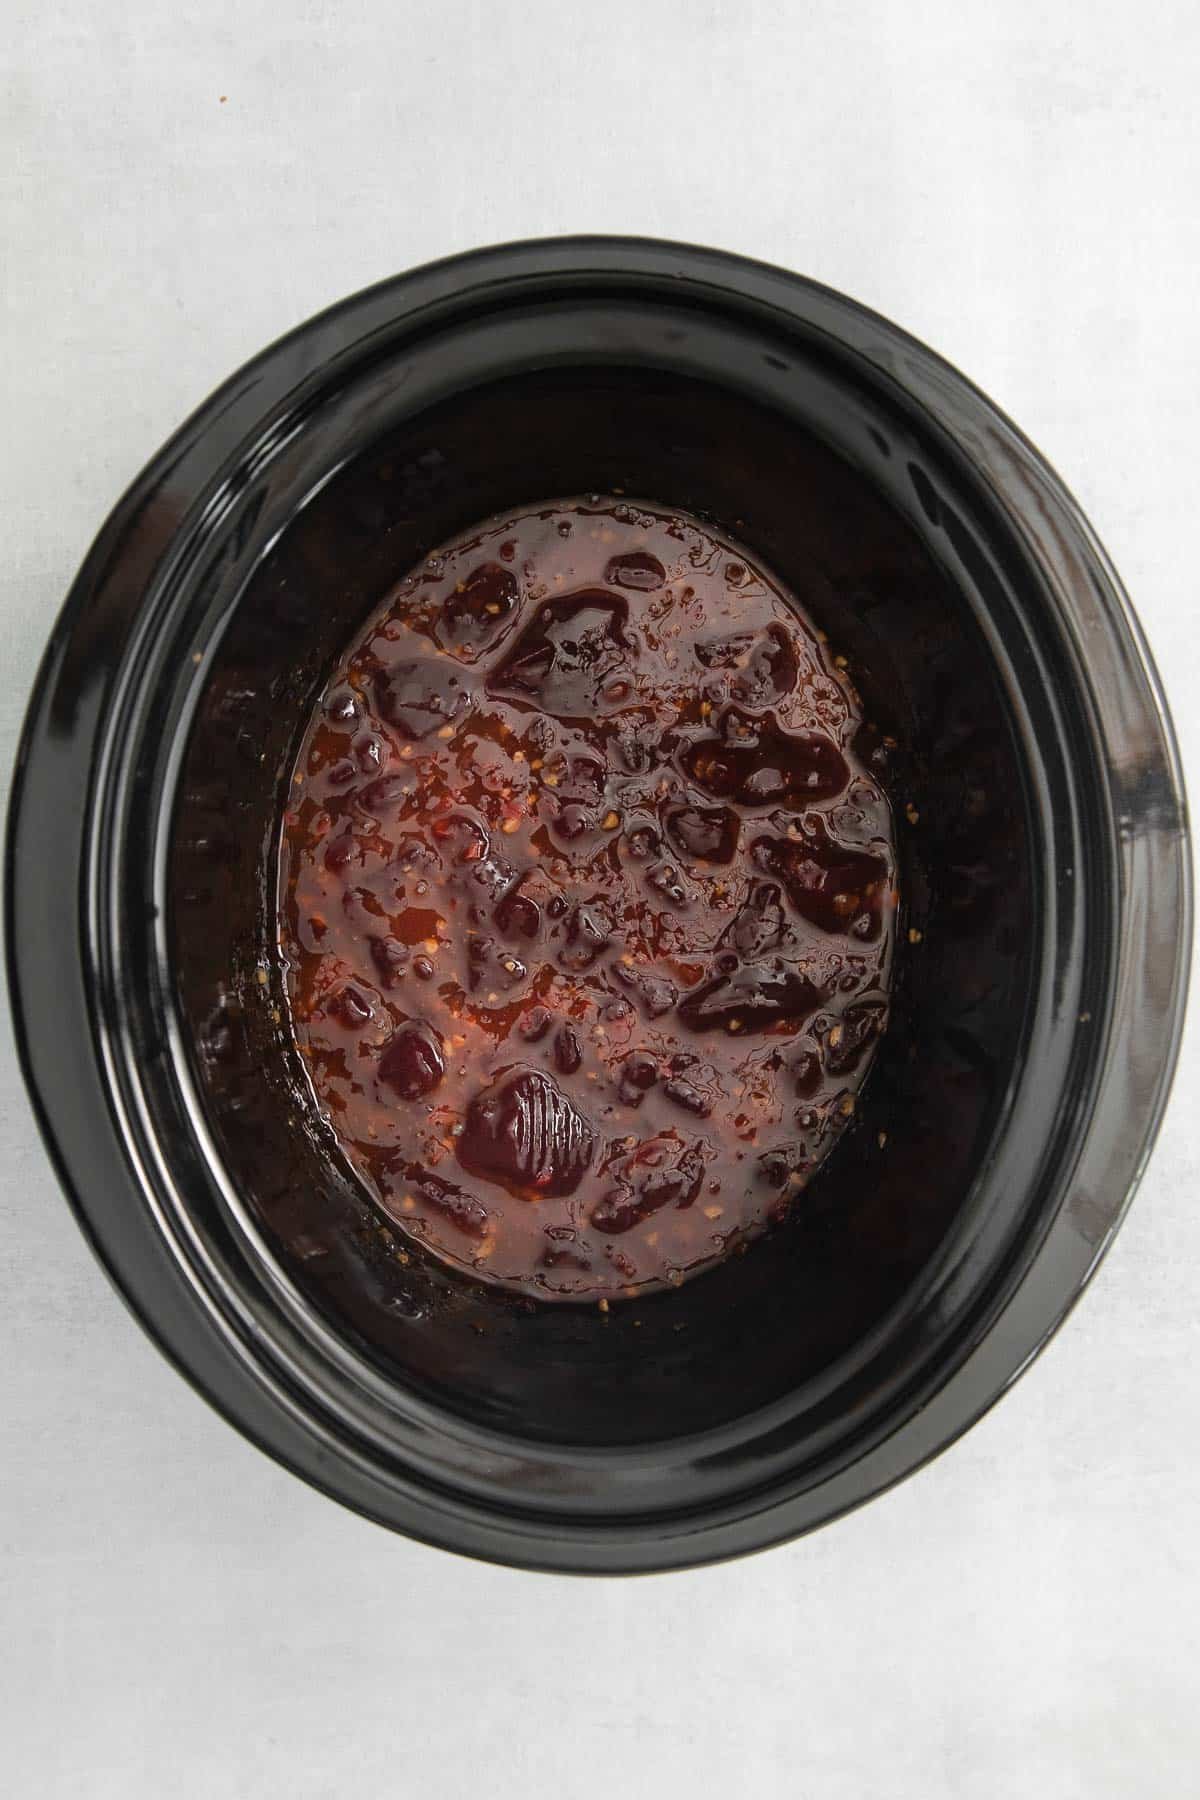 black slow cooker with cranberry sauce and chili sauce.